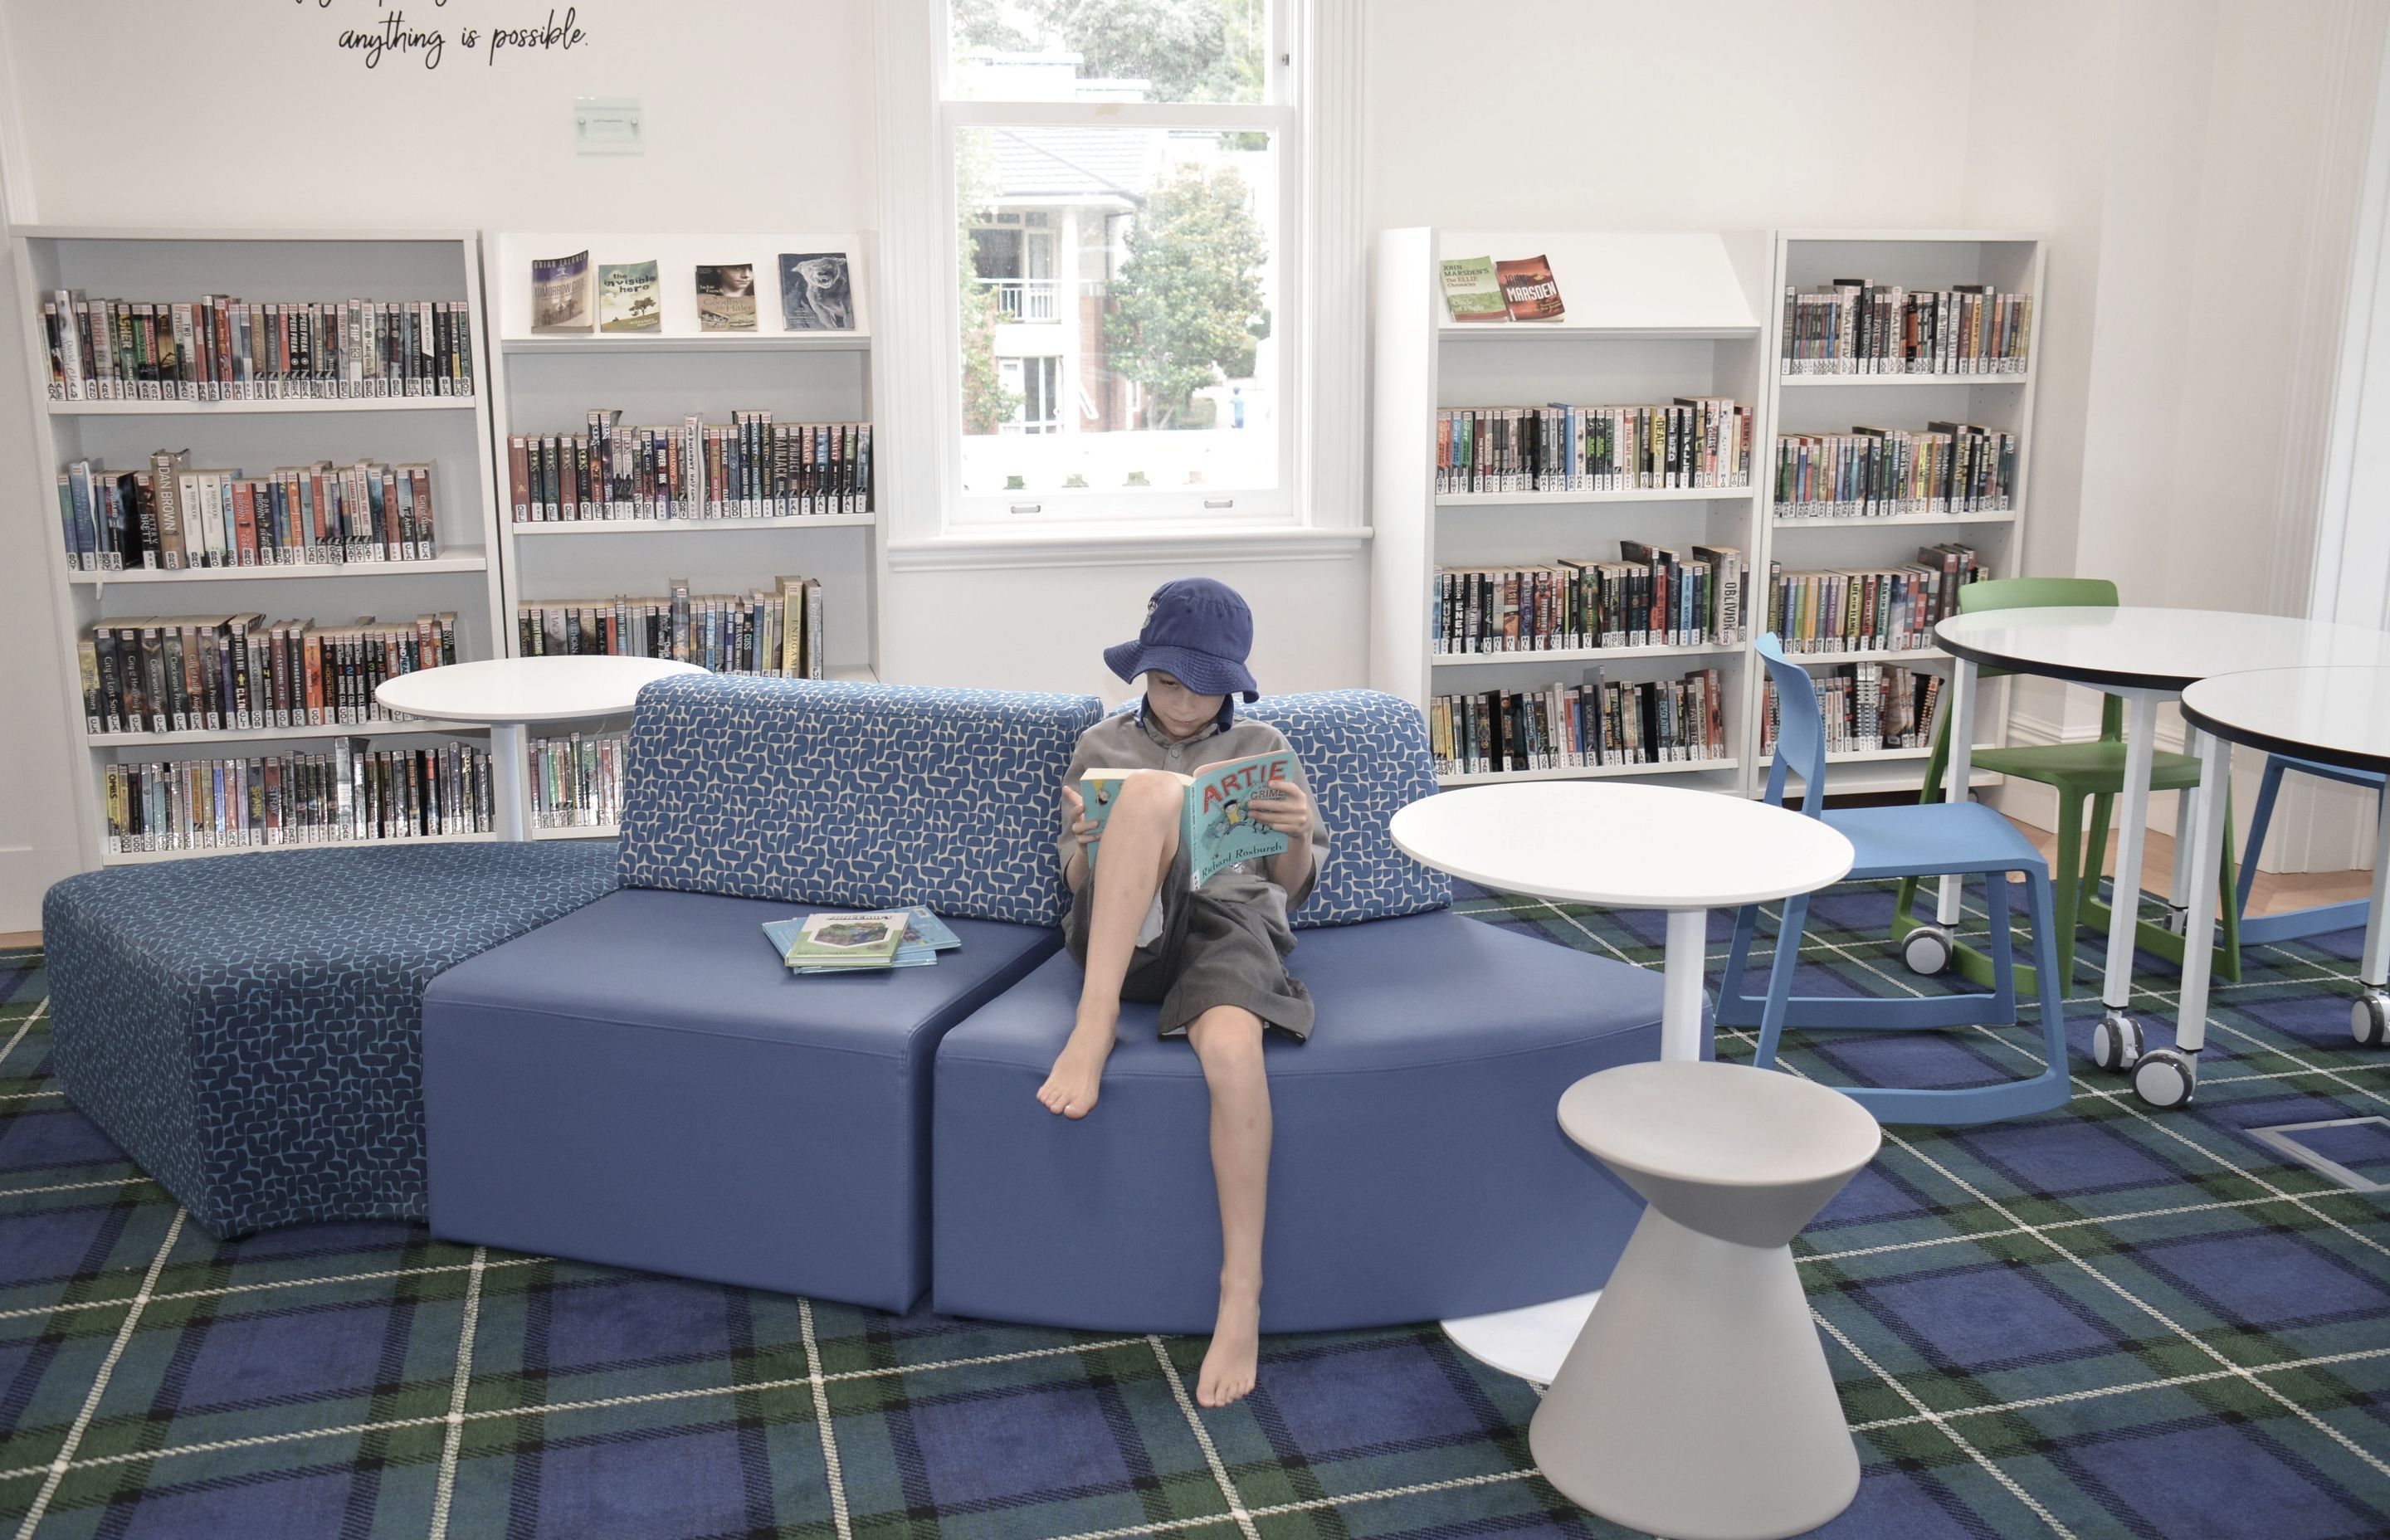 Flexible furniture that allows dynamic body positions allowing kids to remain mentally engaged. Bespoke carpet designed in keeping with the school's tartain.